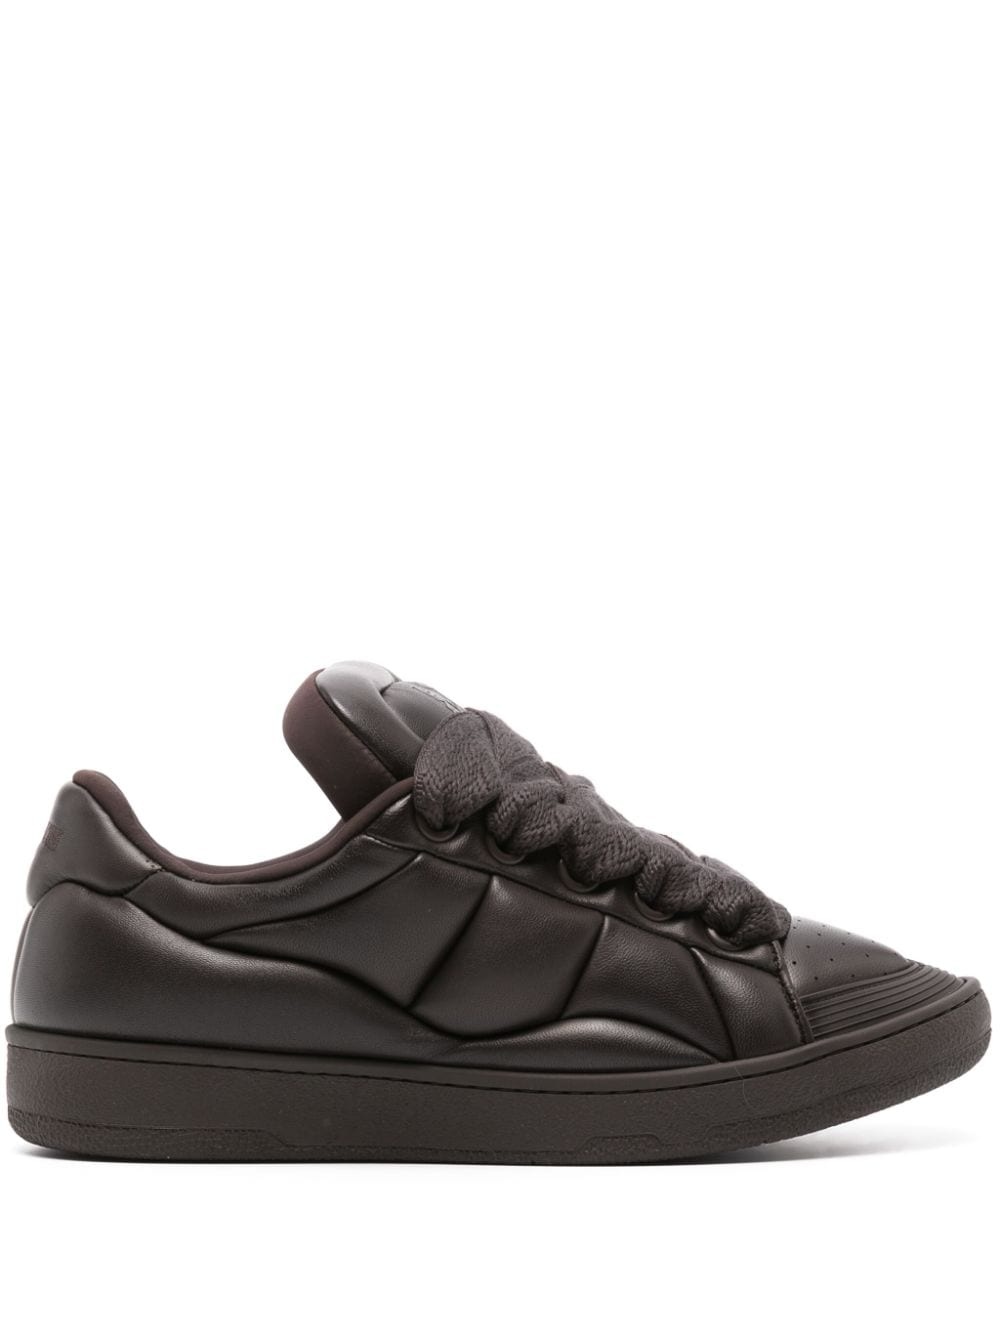 Curb XL leather sneakers - 1